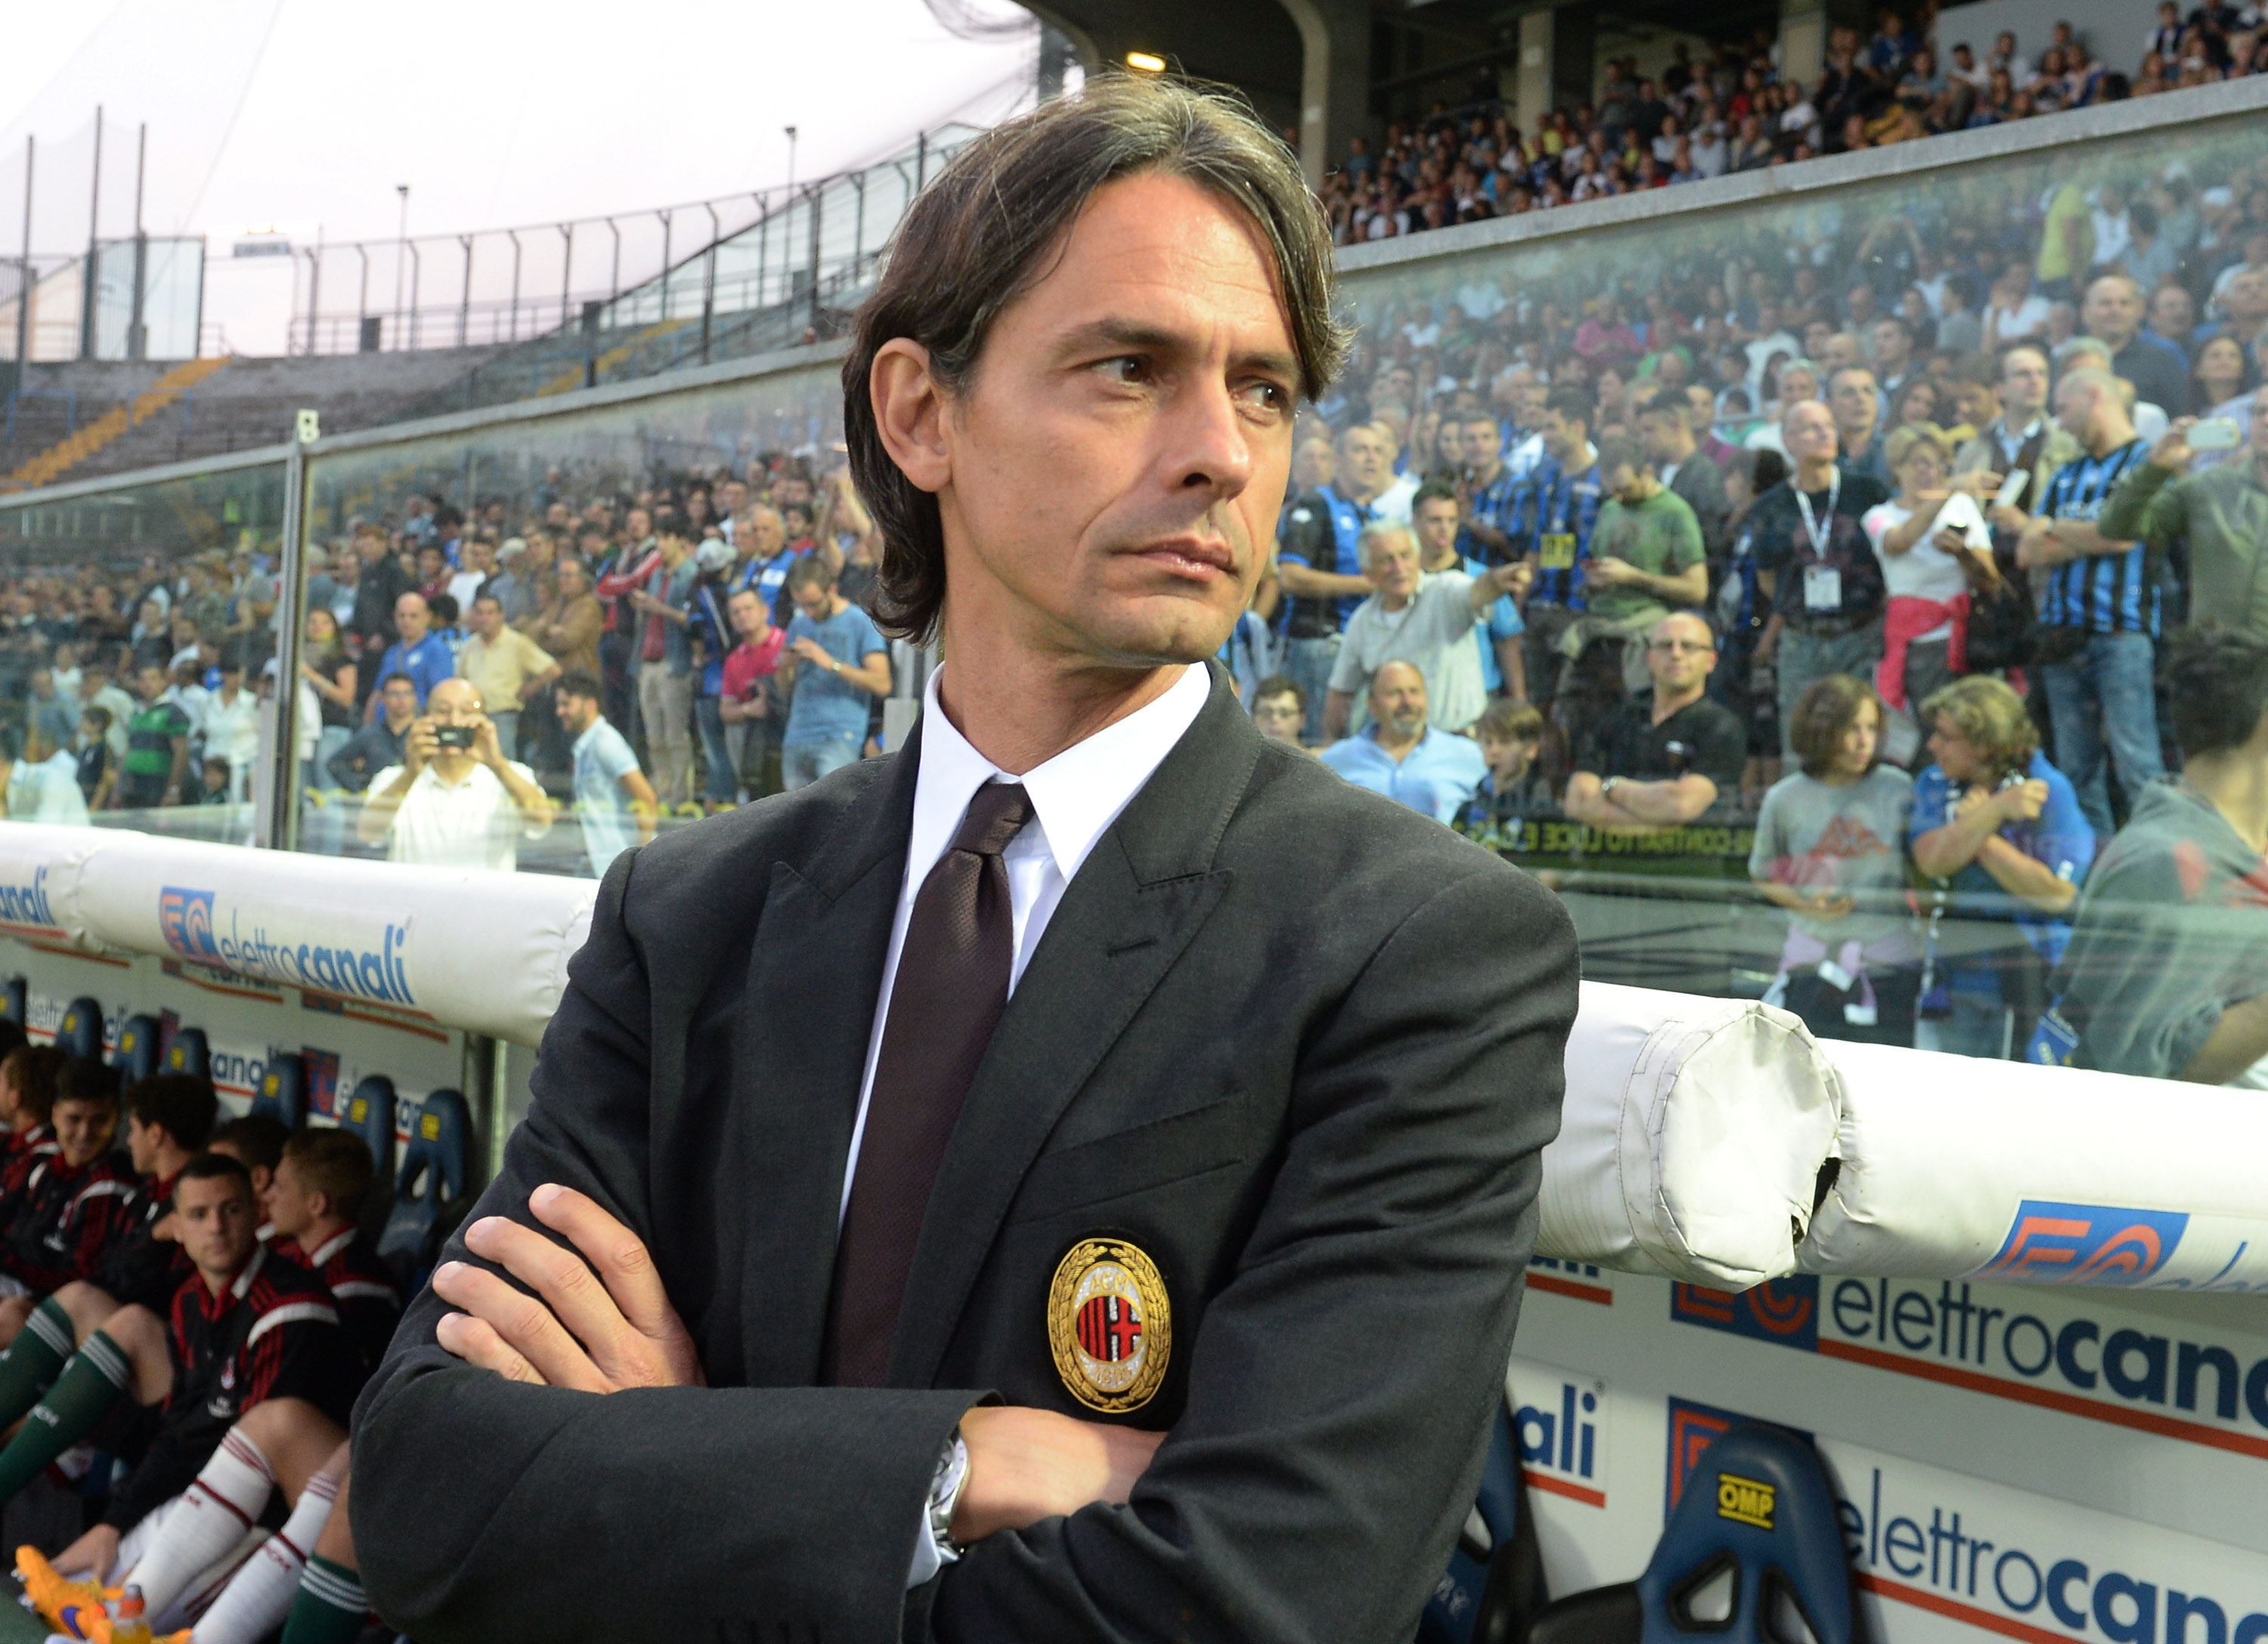 BERGAMO, ITALY - MAY 30: Head coach of AC Milan Filippo Inzaghi looks on during the Serie A match between Atalanta BC and AC Milan at Stadio Atleti Azzurri d'Italia on May 30, 2015 in Bergamo, Italy. (Photo by Dino Panato/Getty Images)